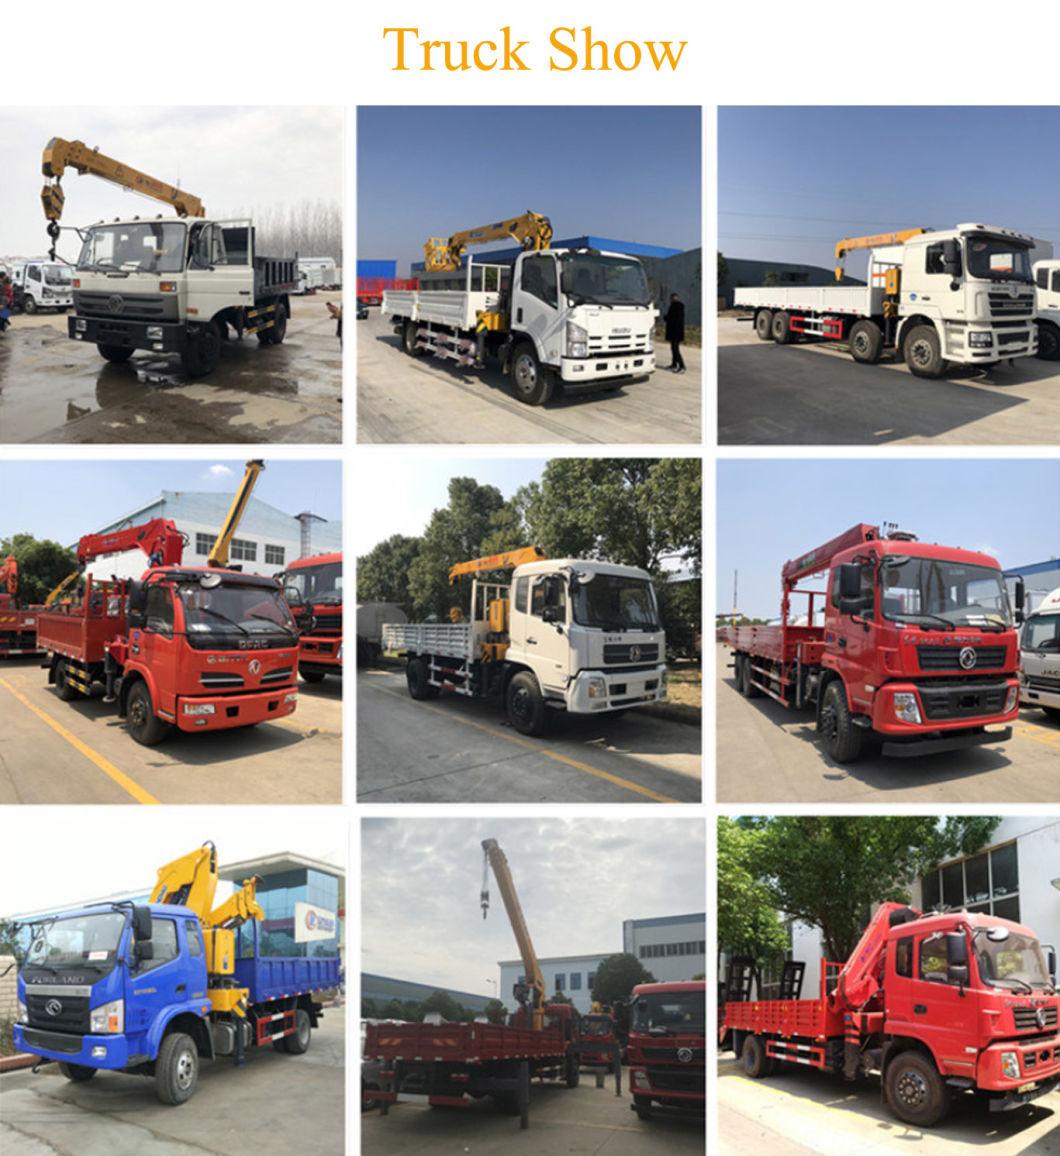 Dongfeng 4X2 Hydraulic Hoisting Truck Mounted Loading Crane Constructionlifting Machine With5ton Truck with 4 Arms Knuckle Boom Crane Optional Rig Drill Well